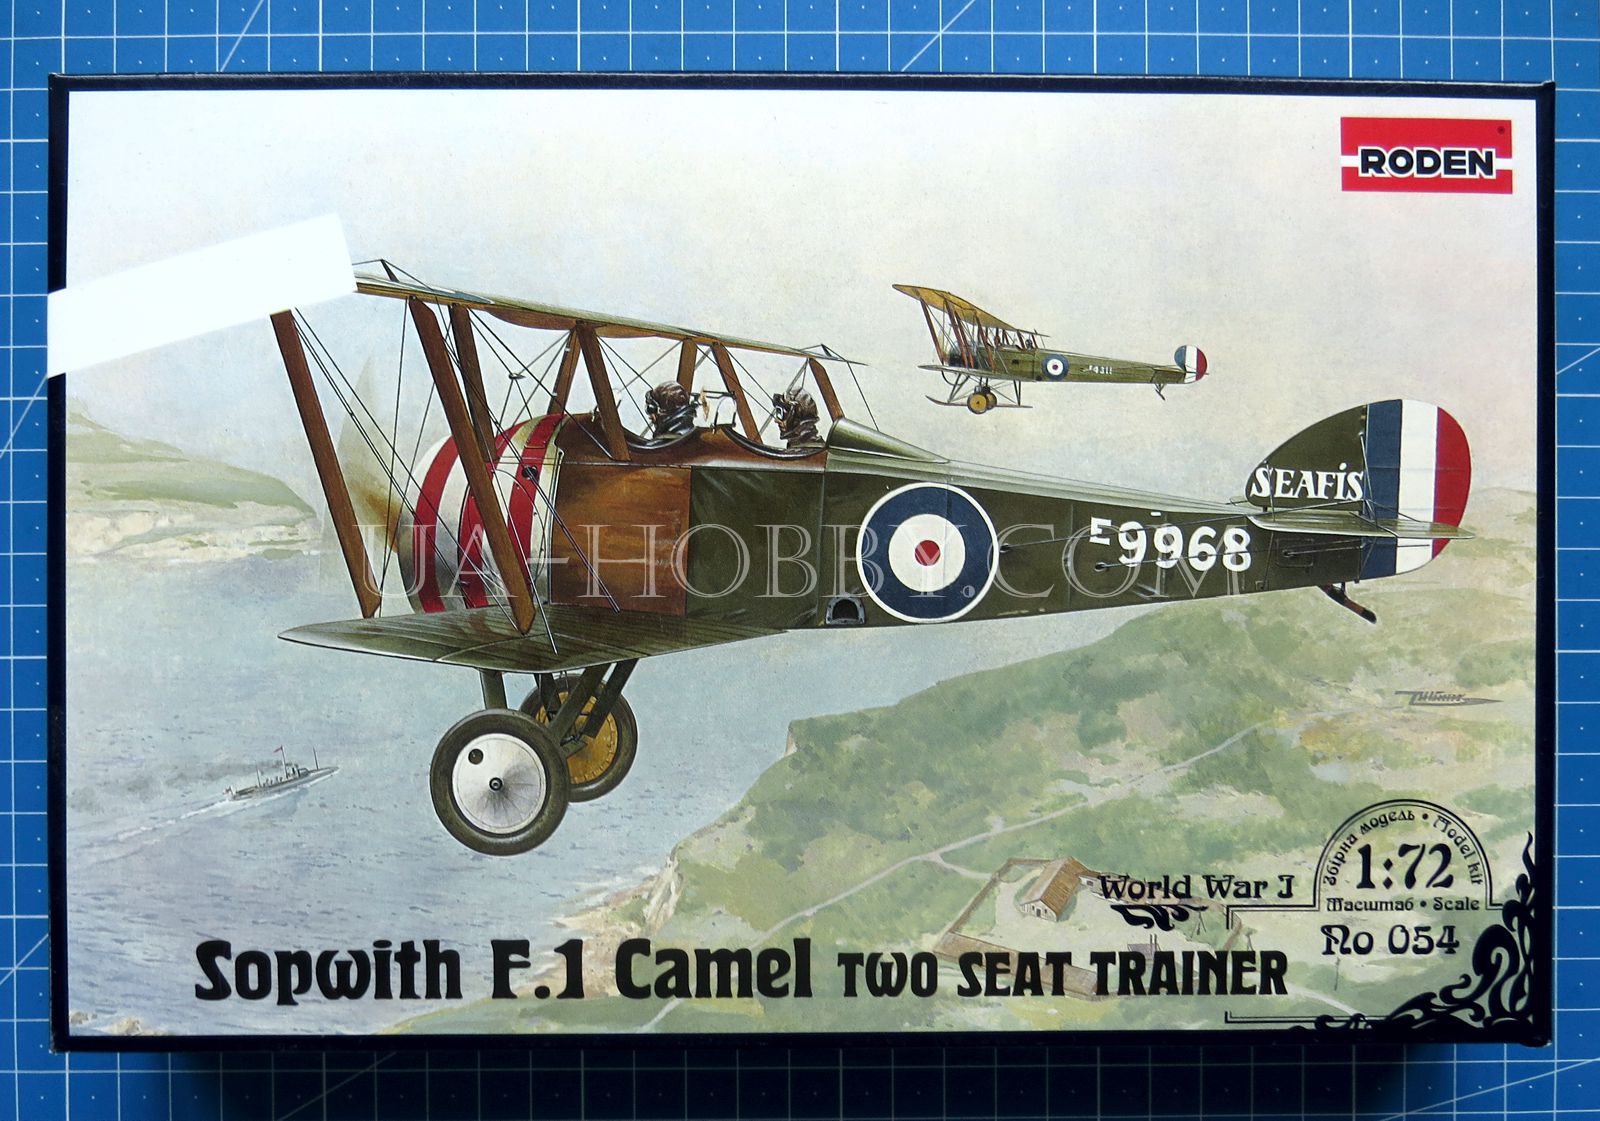 1/72 Sopwith F.1 Camel Two Seat Trainer. Roden 054